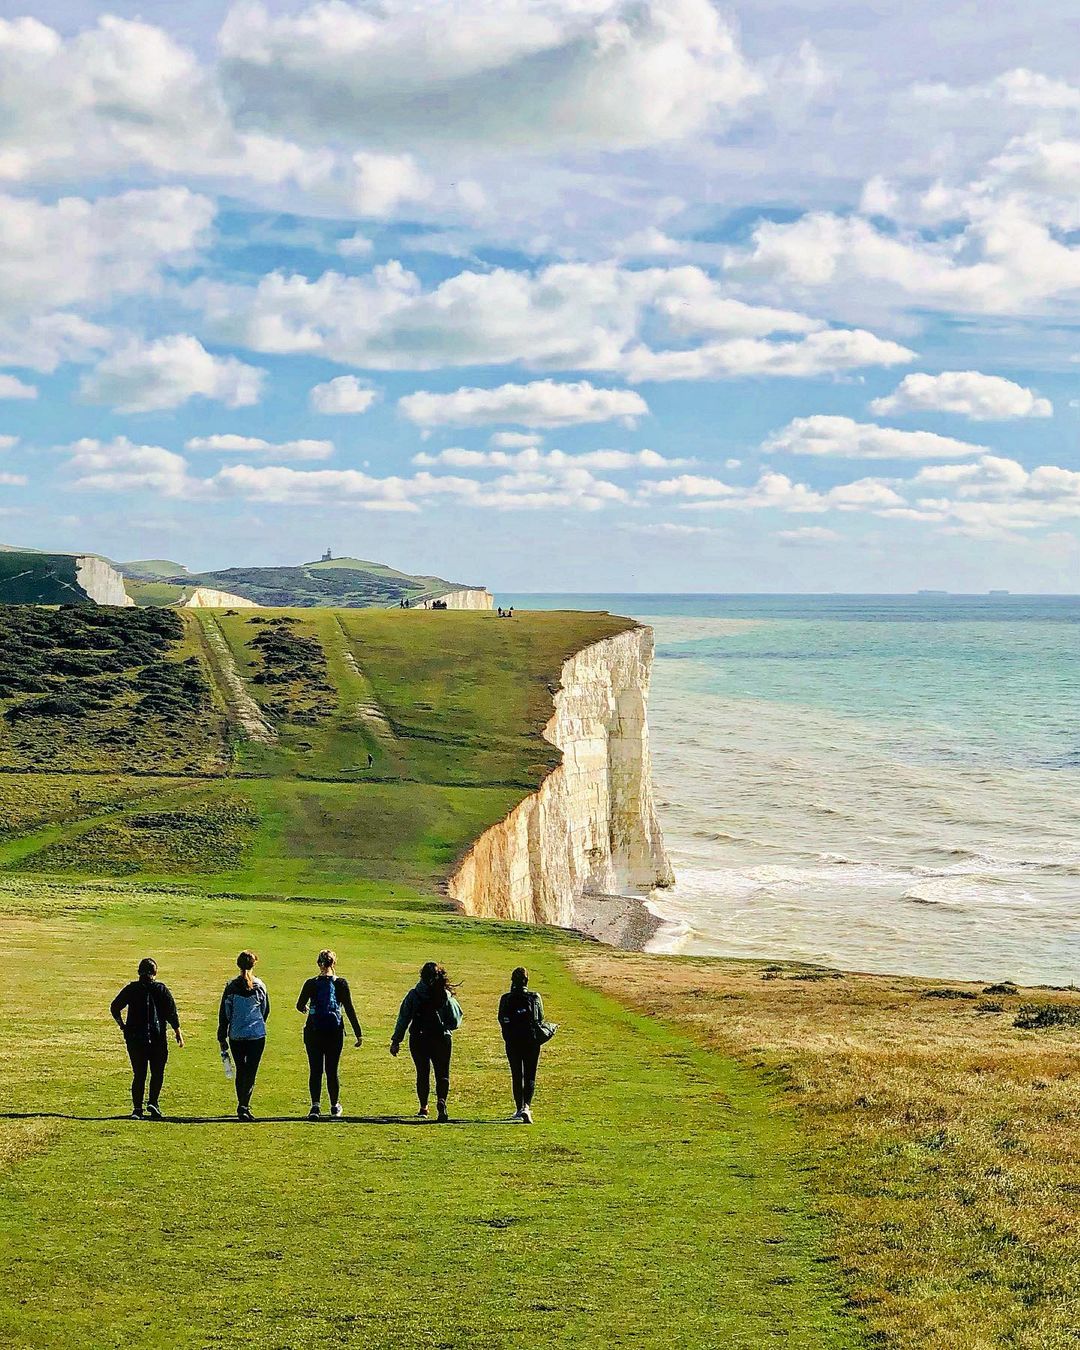 Five people walking on a grassy area on the Seven Sisters hike overlooking the cliffs and ocean.